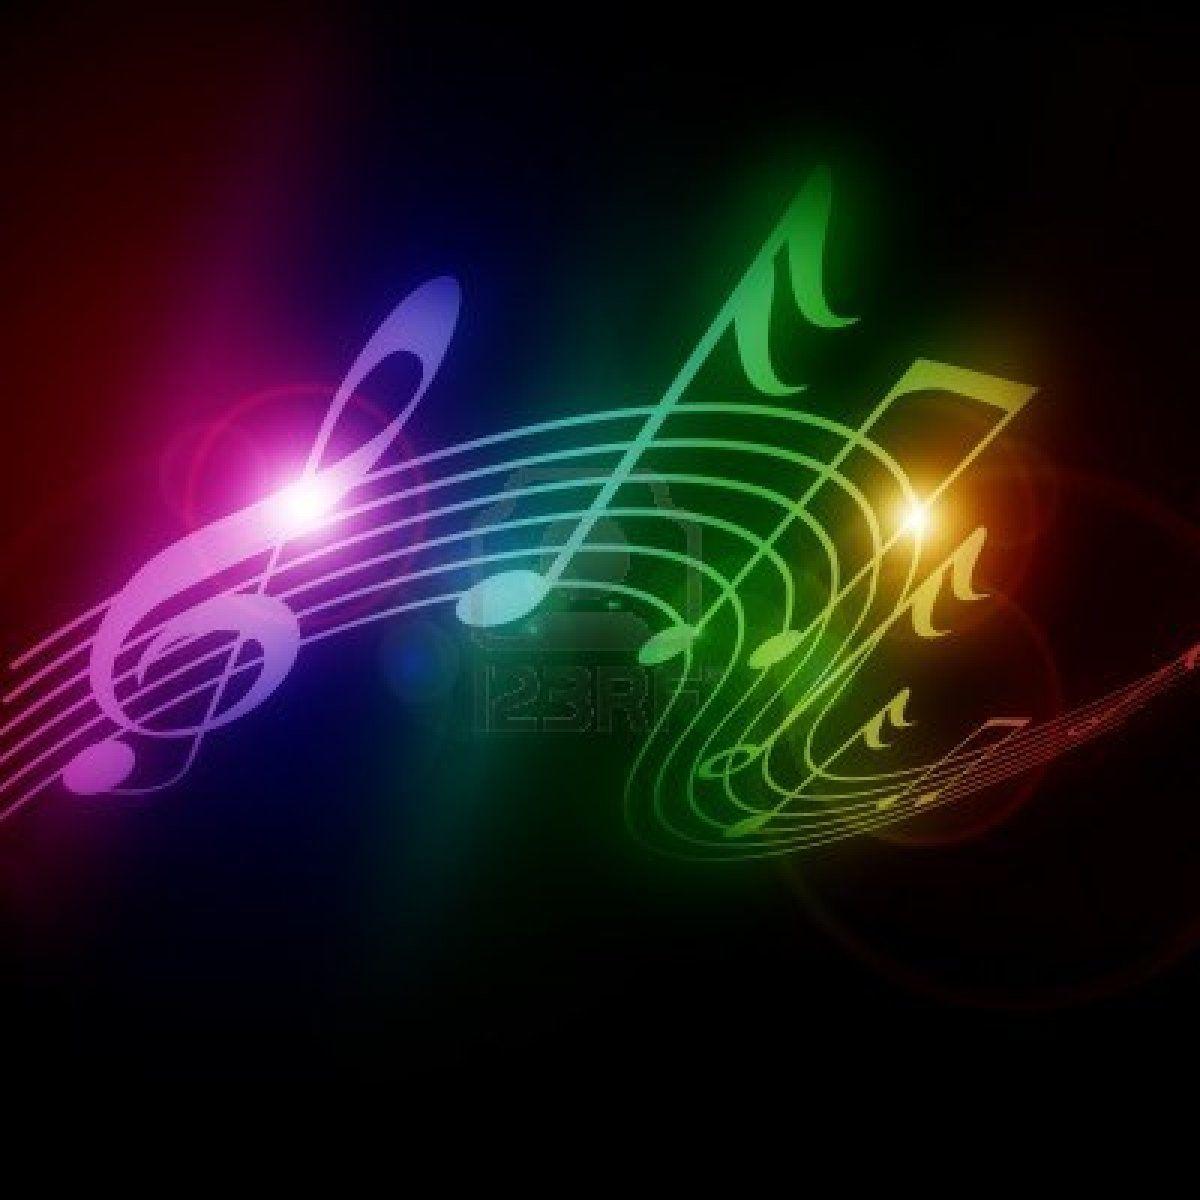 Colorful Musical Notes Wallpaper. High Definition Wallpaper